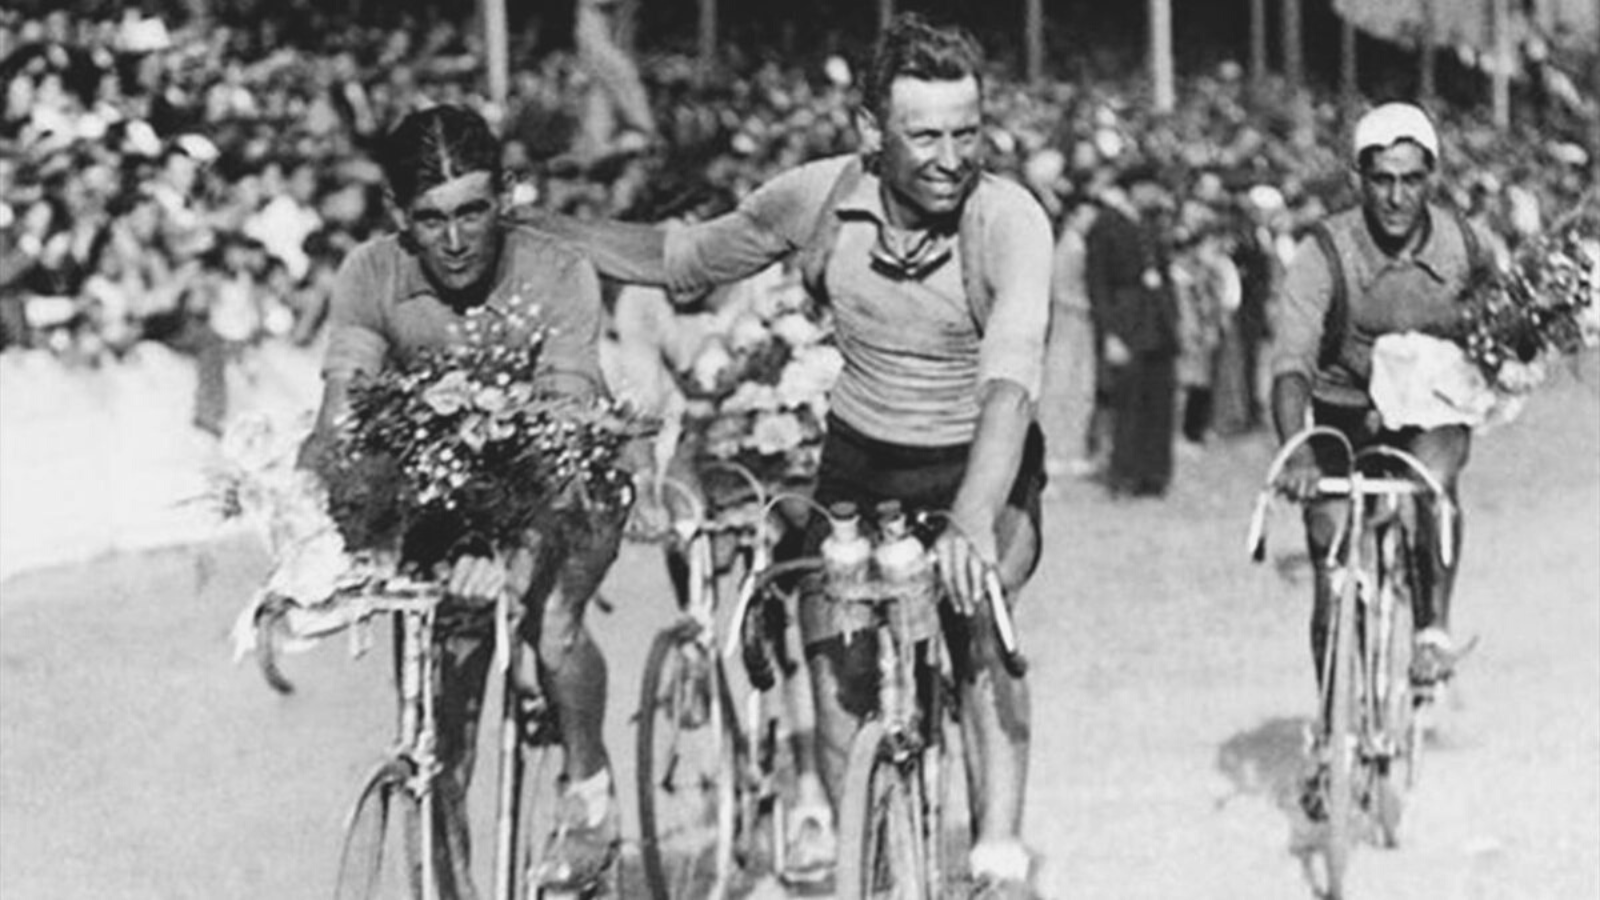 Gustaaf Deloor, the winner of the first Vuelta a Espana with his brother, Alfons Deloor